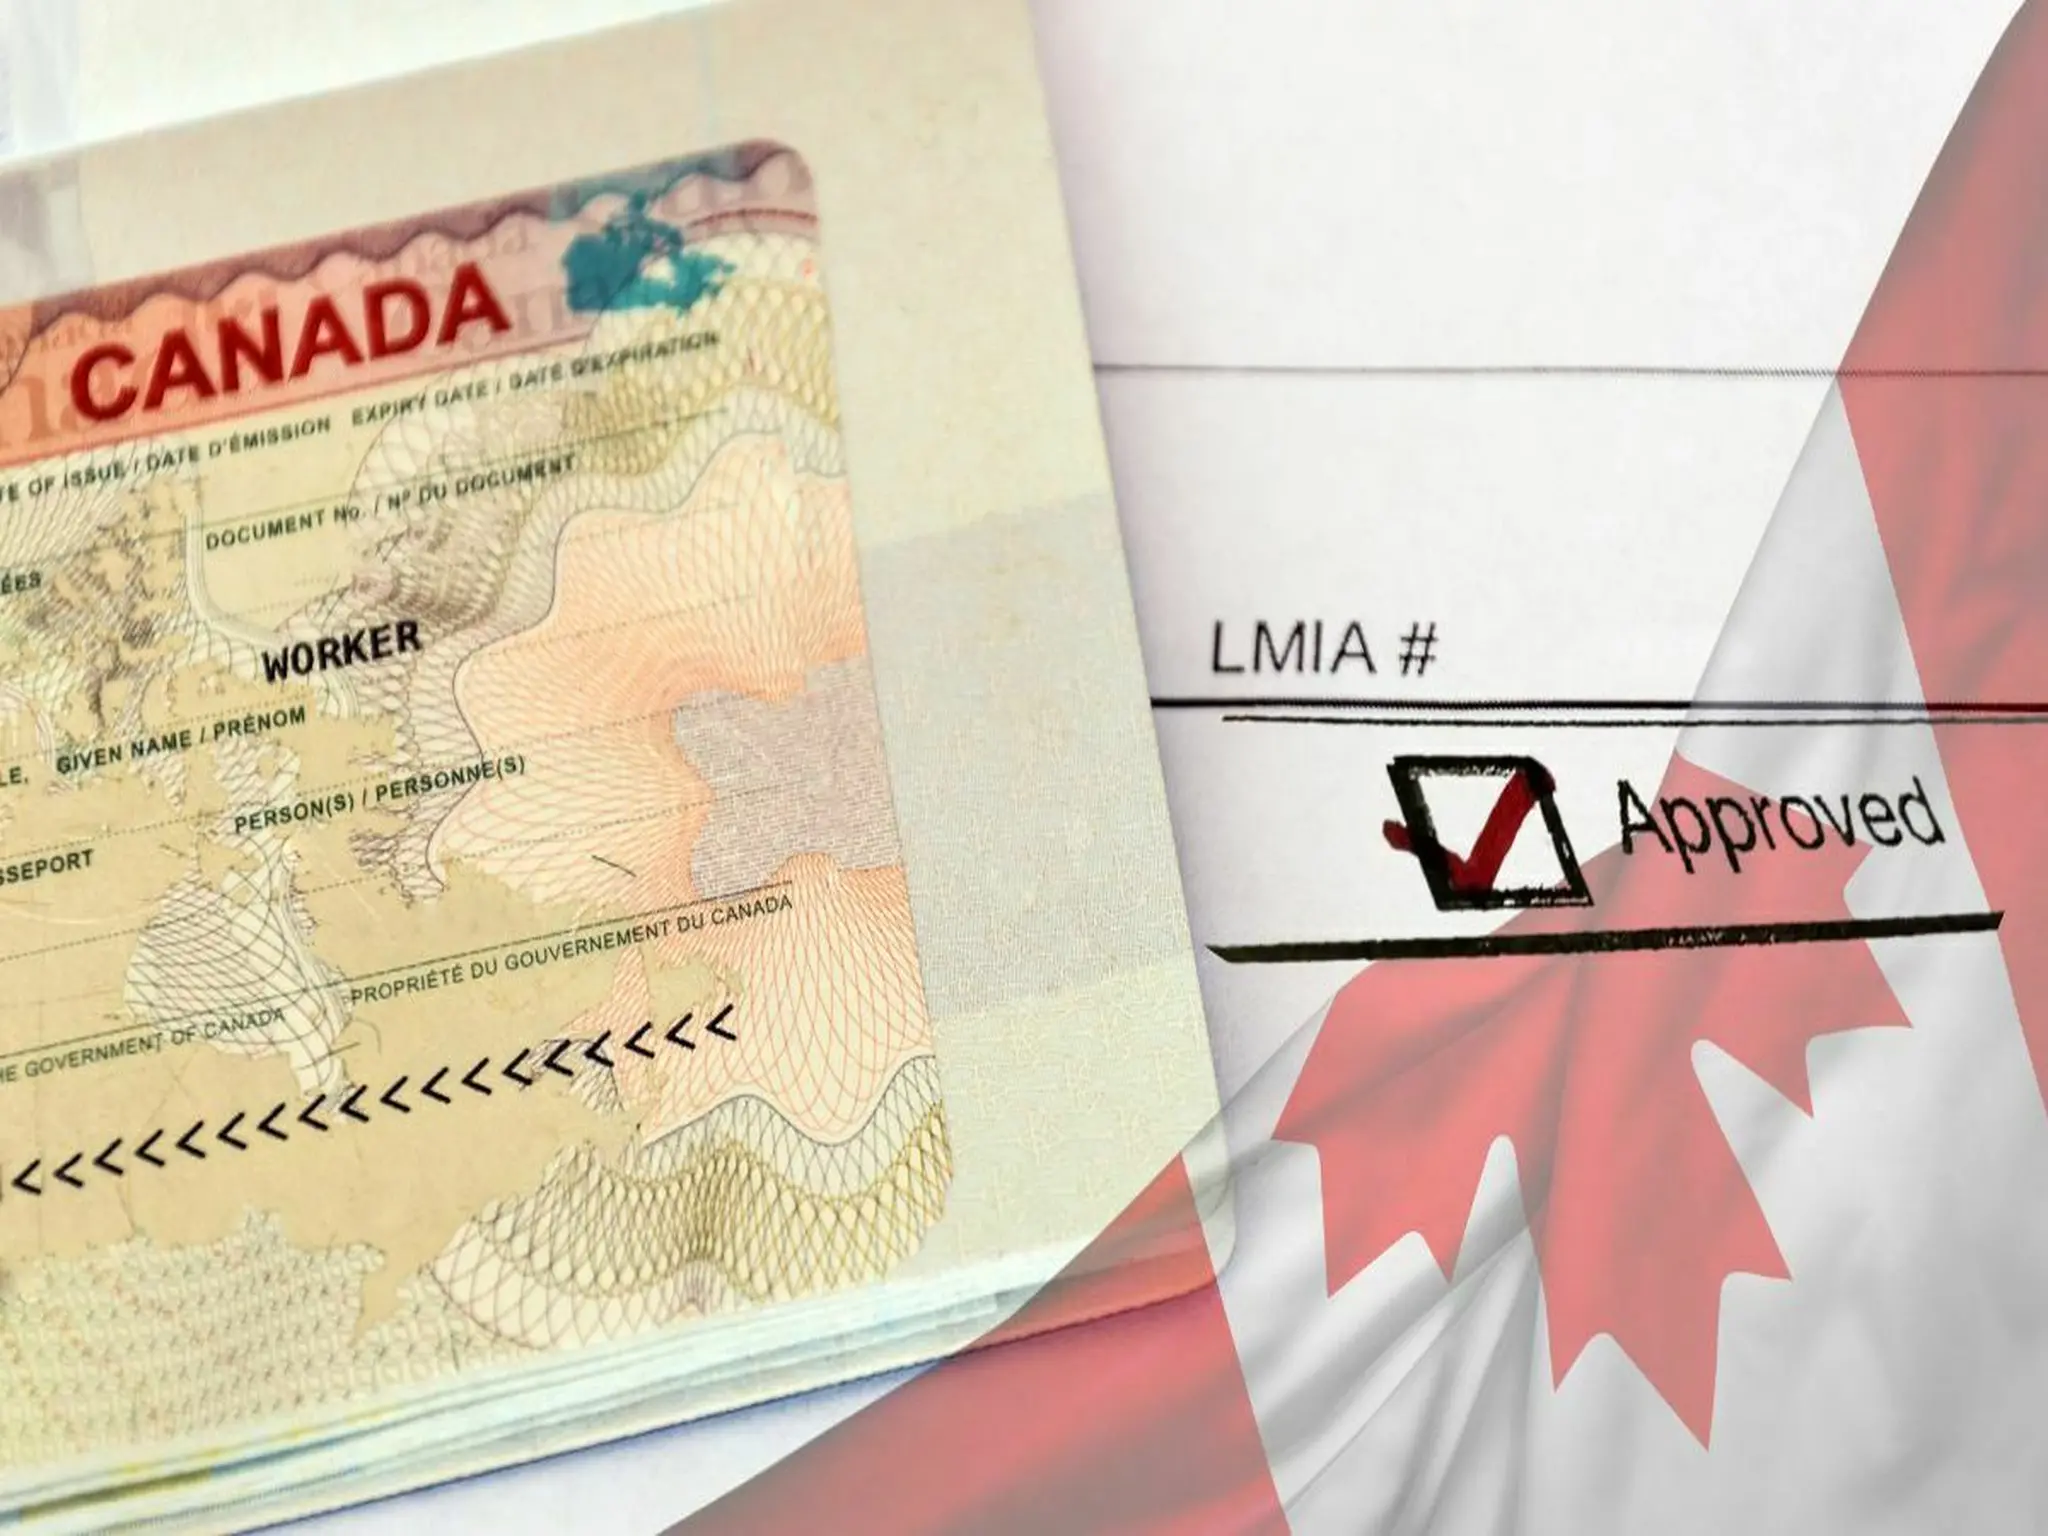 Canada announces the facilitation of procedures for employing foreigners in some provinces